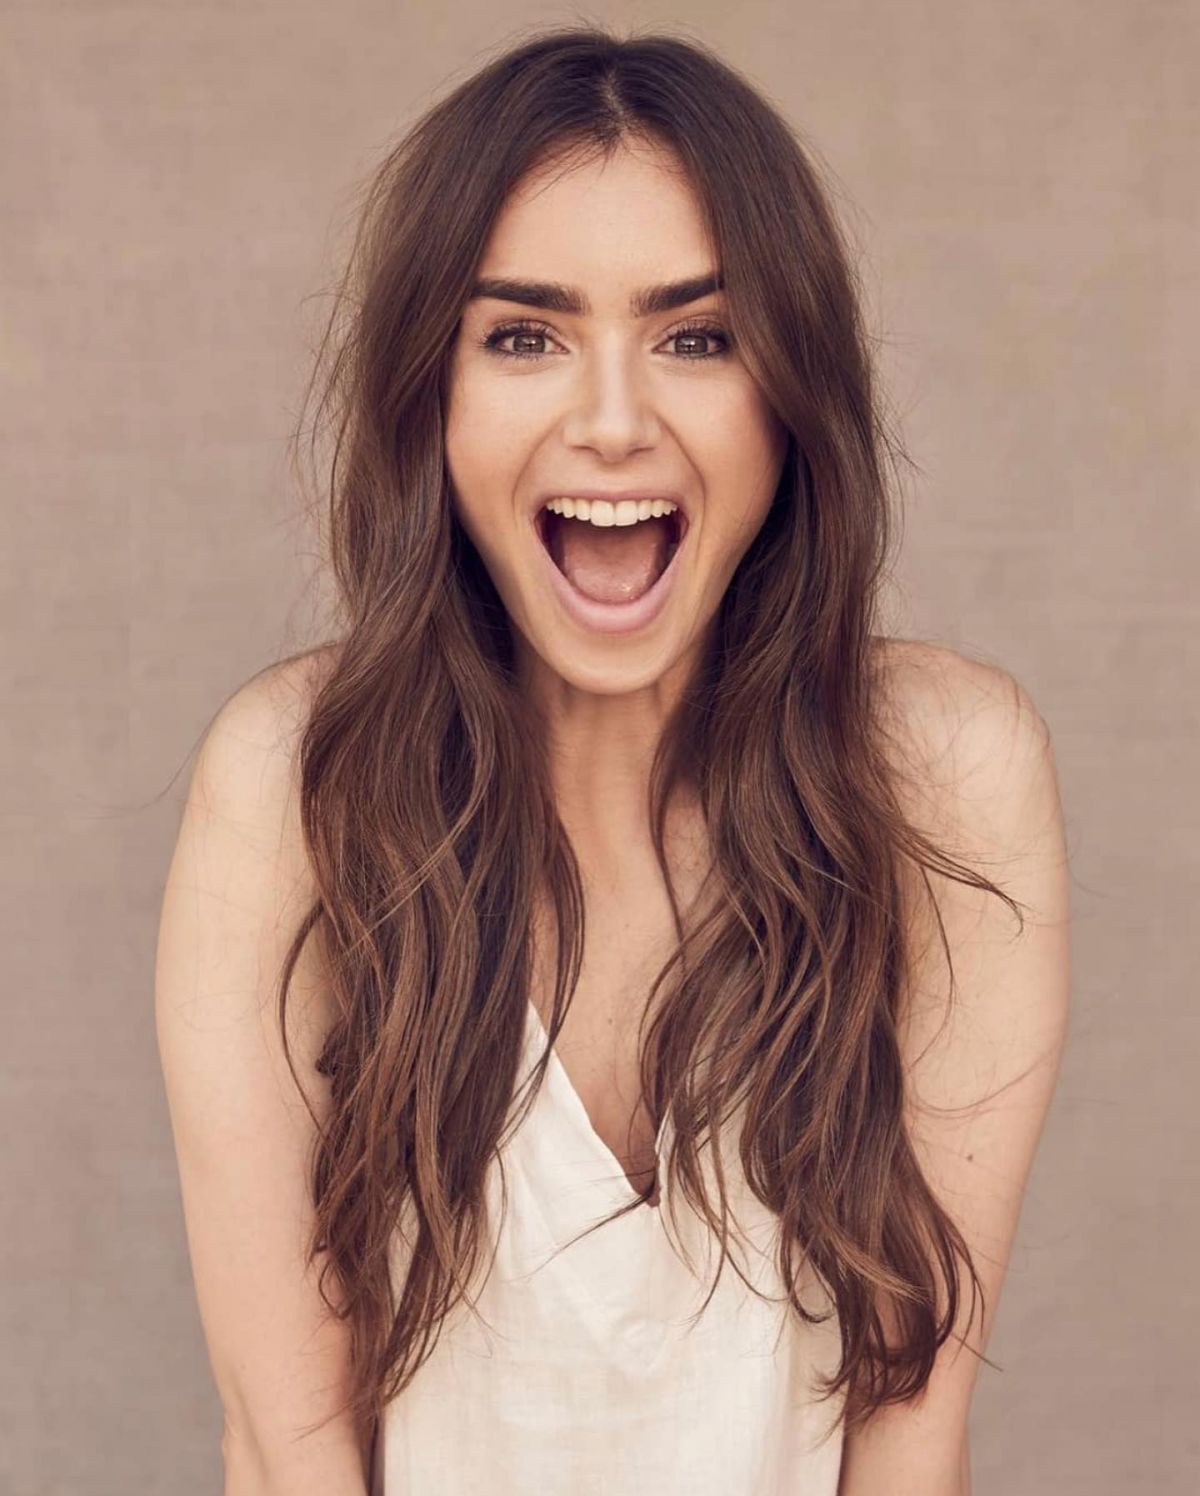 lily-collins-for-the-sunday-times-style-october-2020-0.jpg